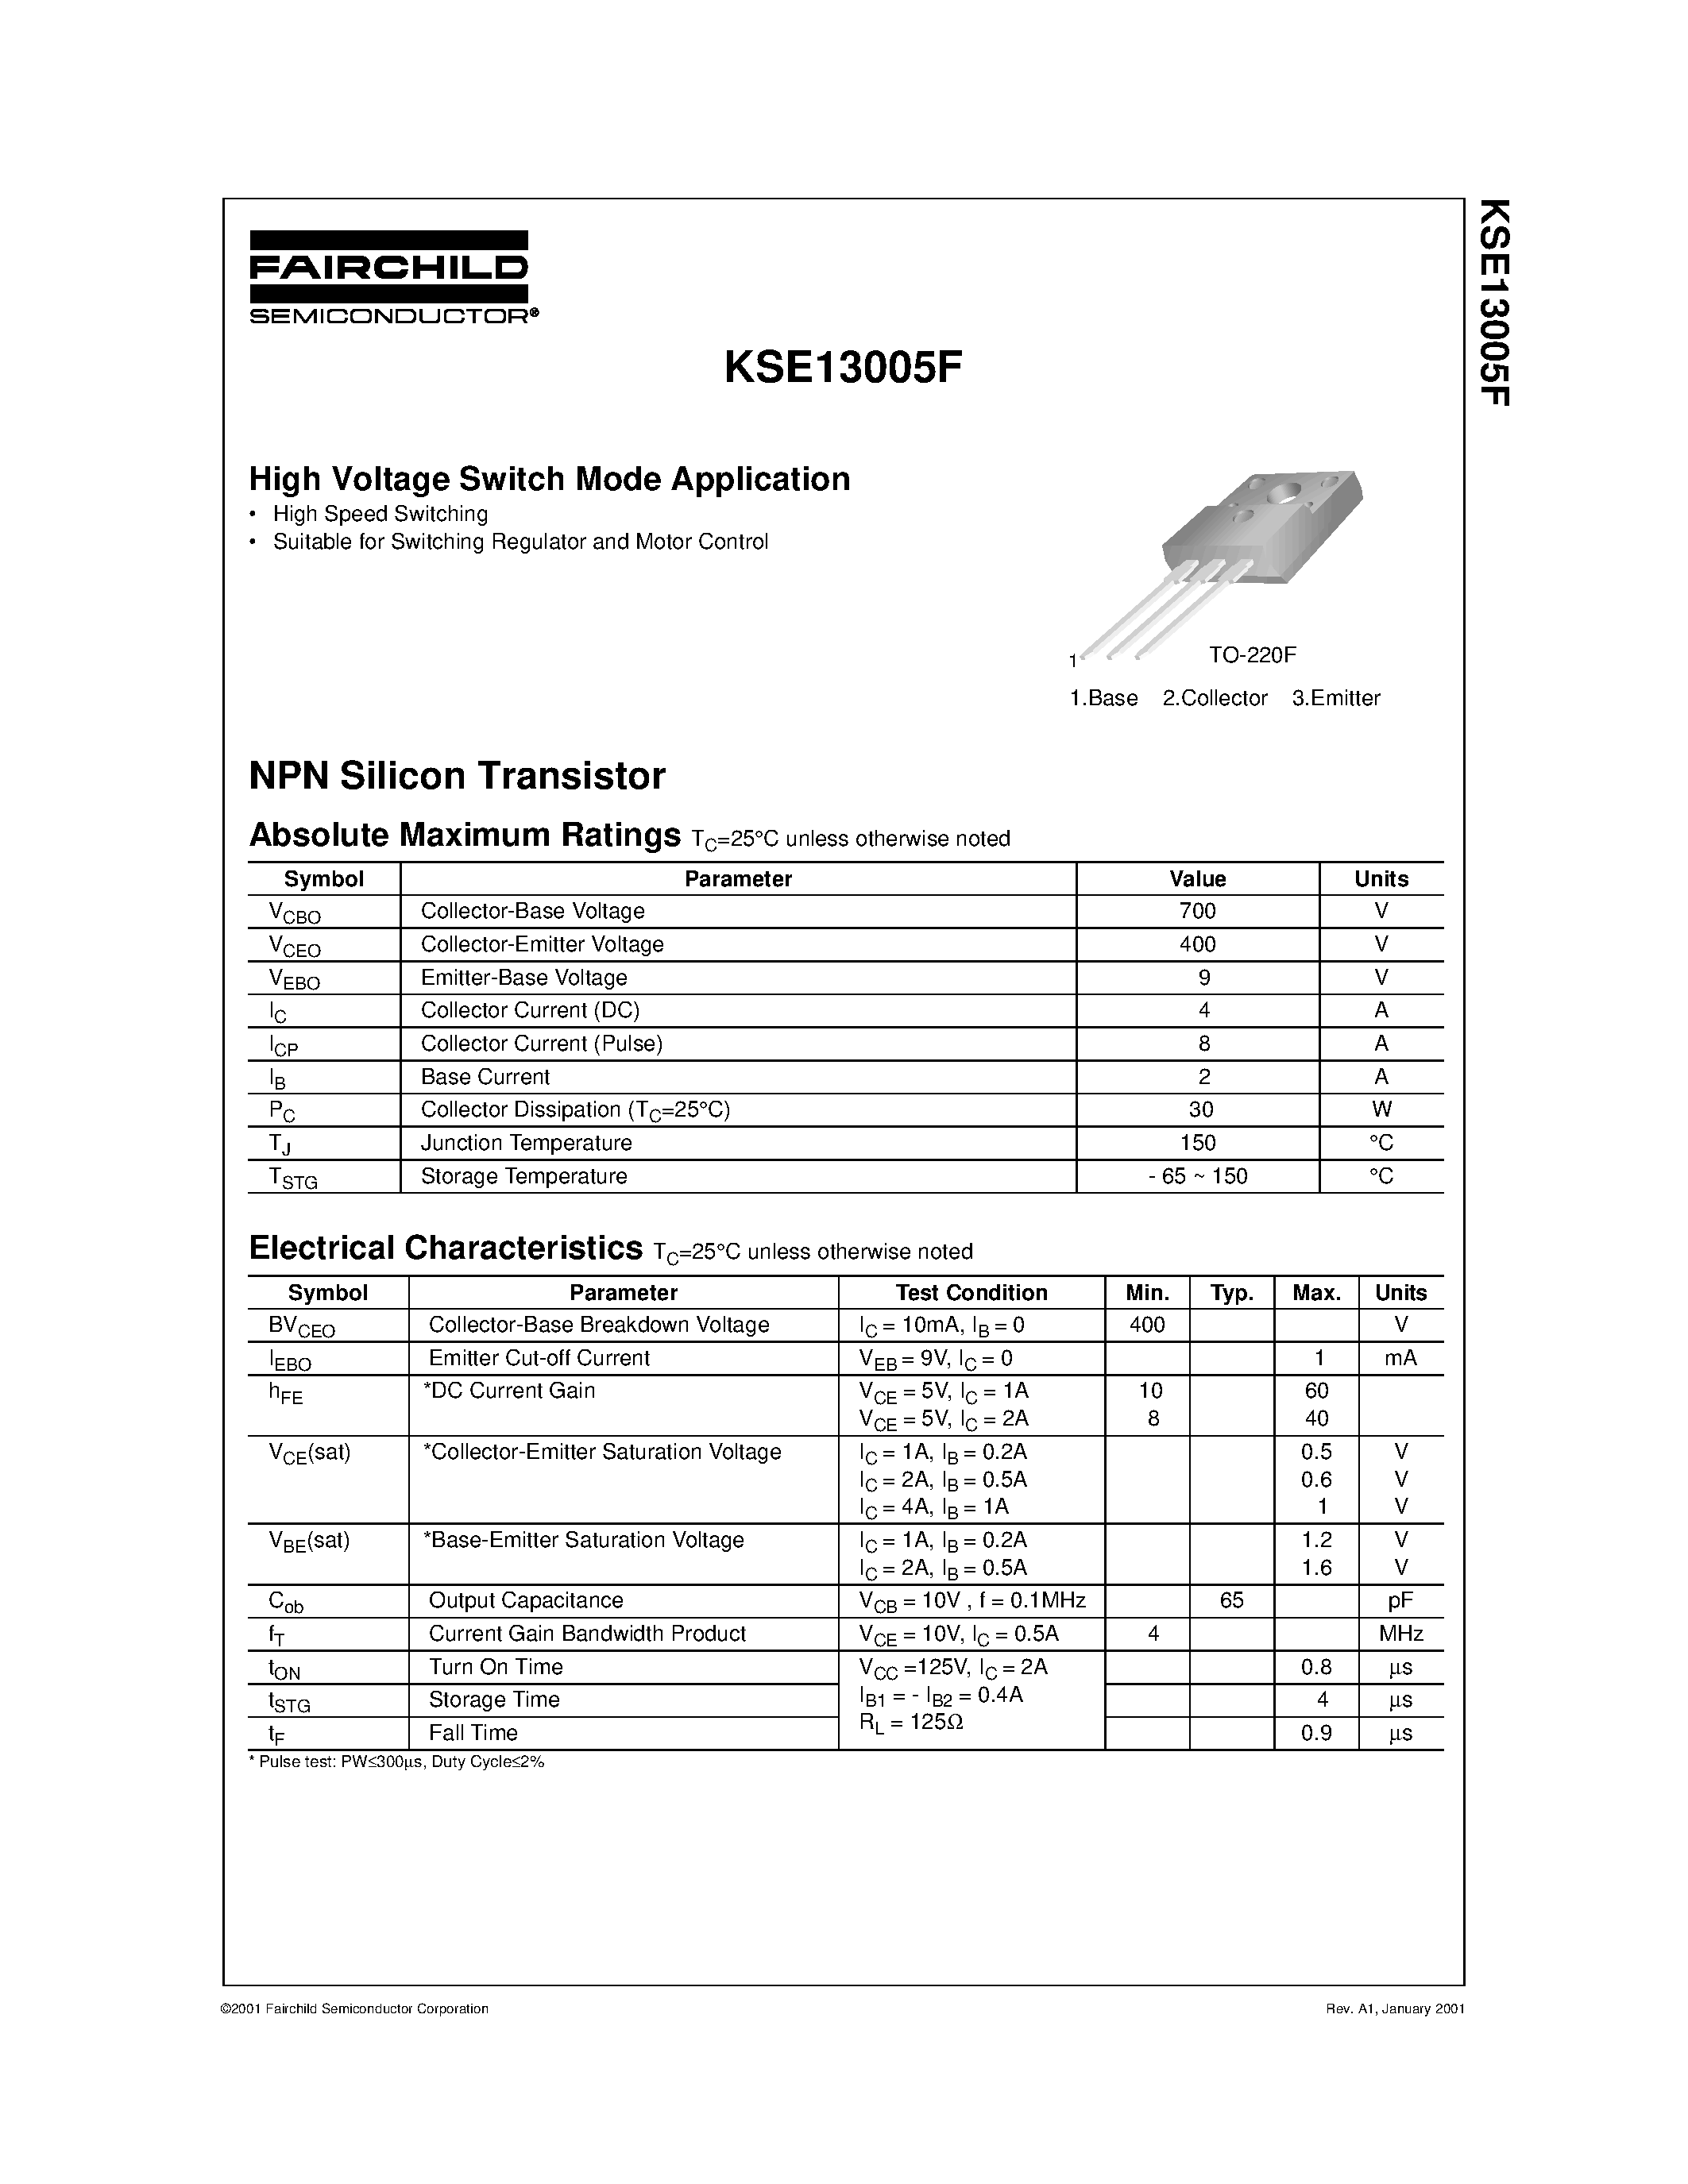 Datasheet KSE13005FH2TU - High Voltage Switch Mode Application page 1